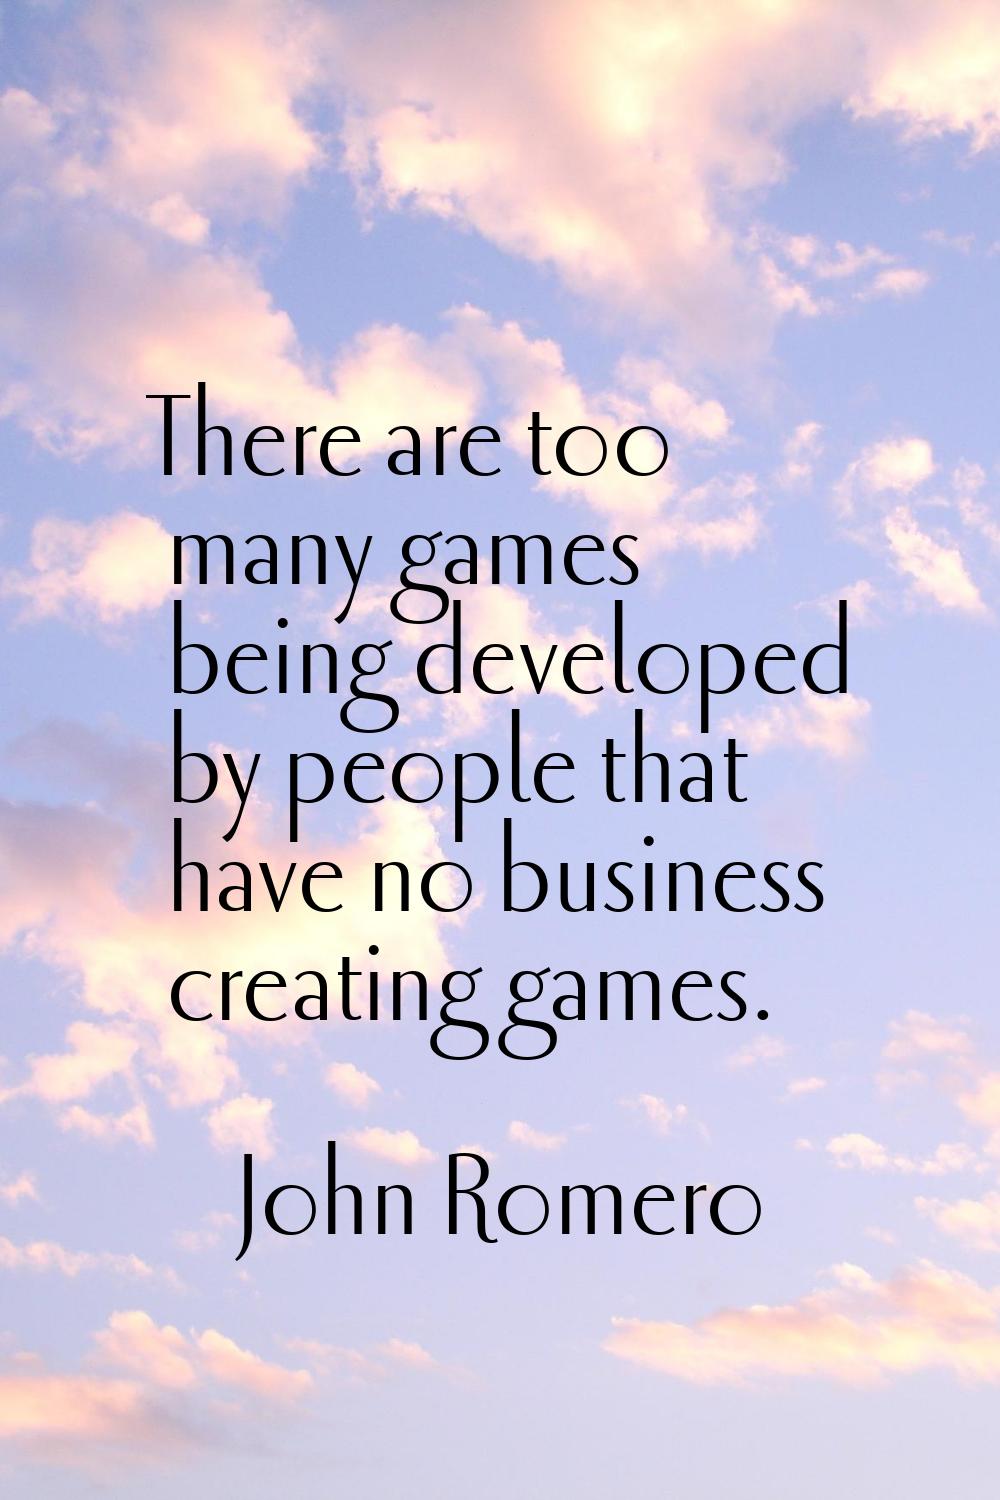 There are too many games being developed by people that have no business creating games.